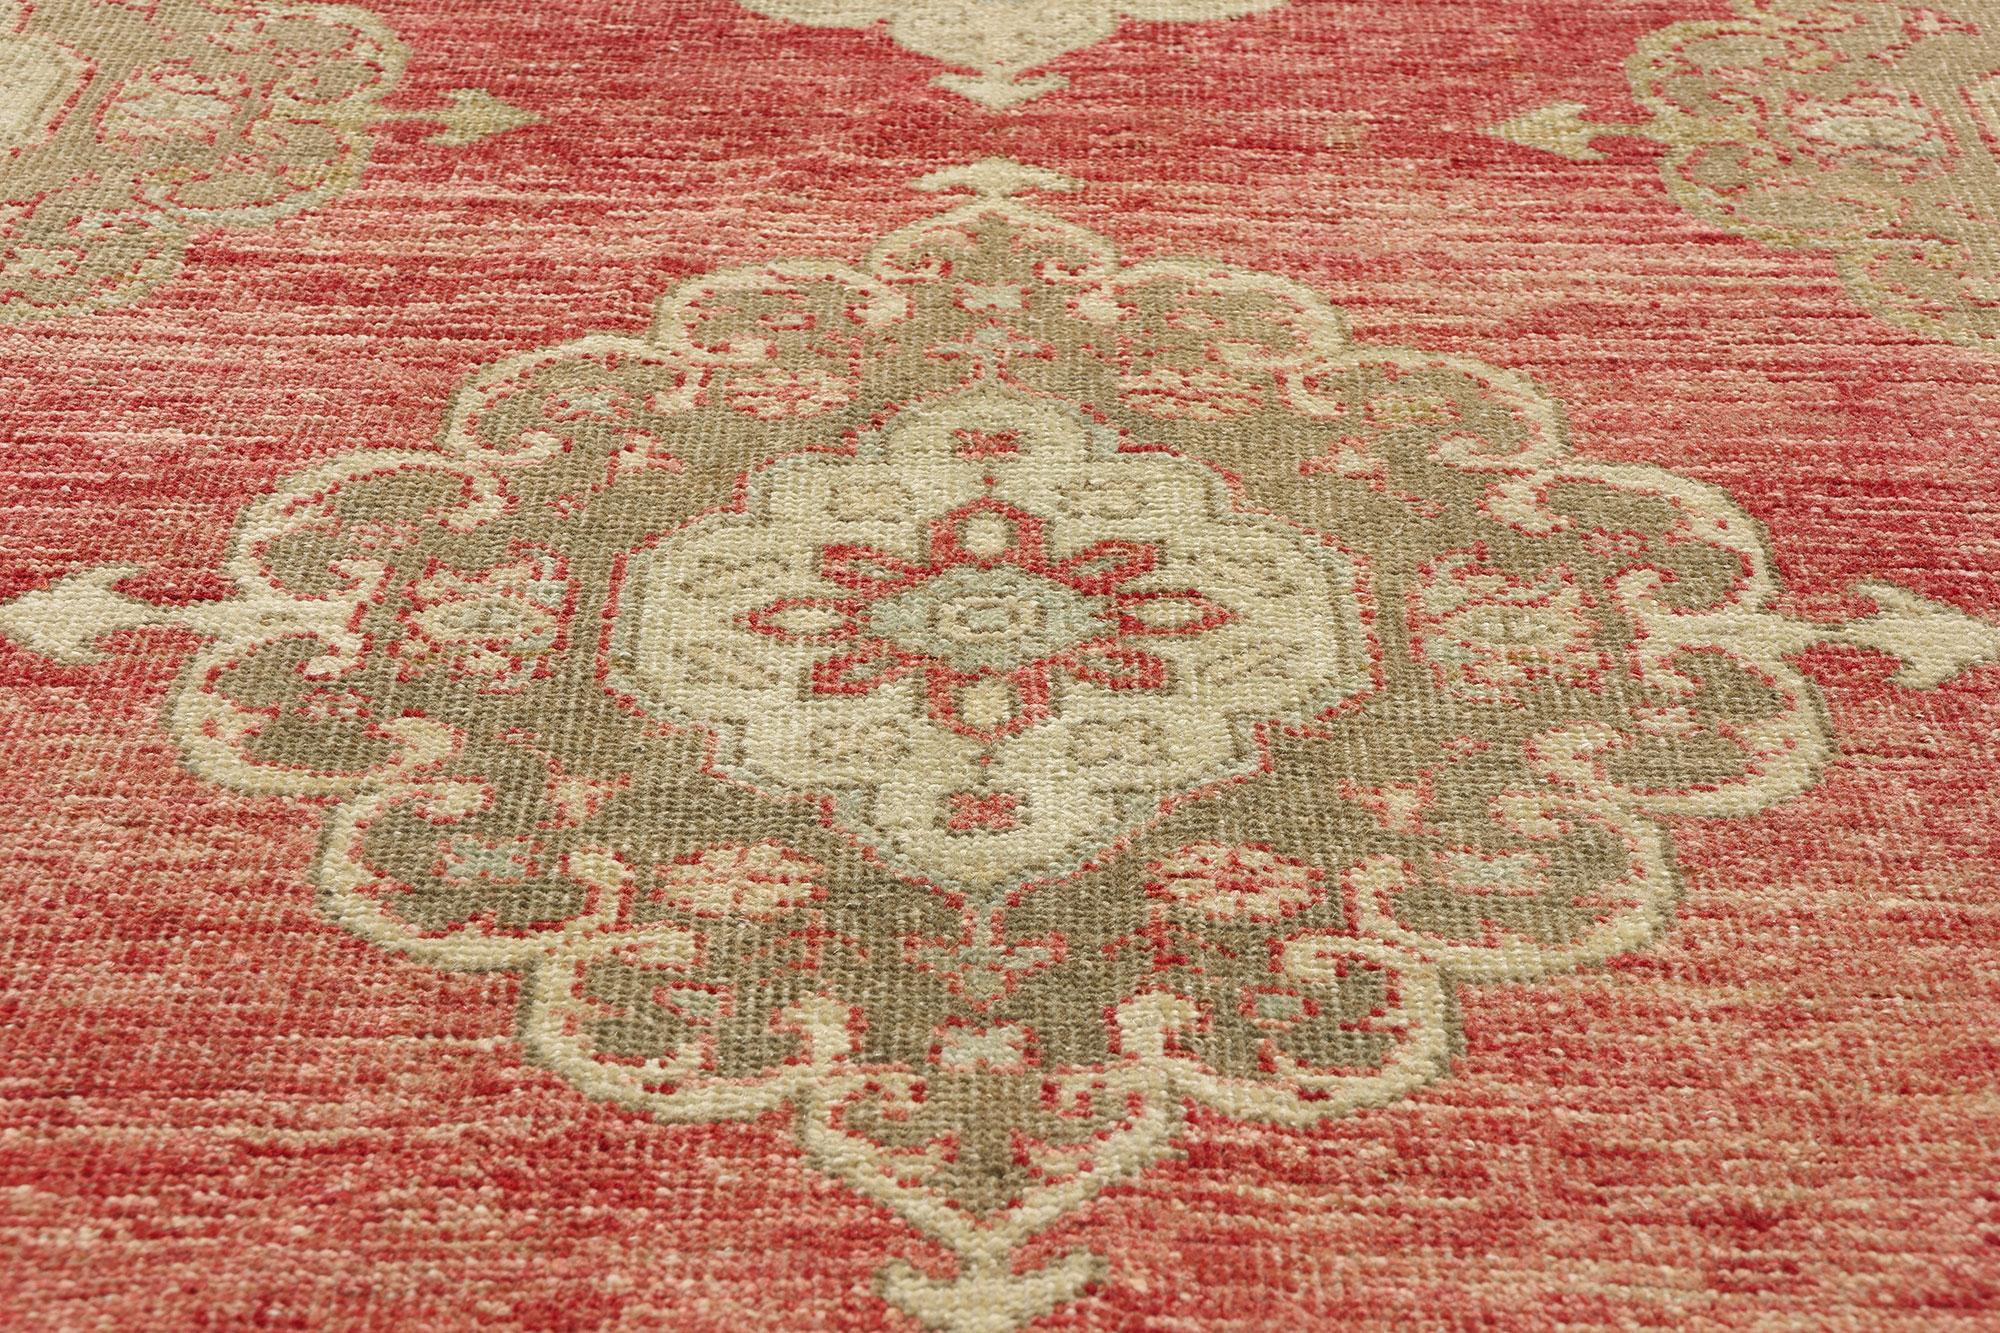 Vintage Red Turkish Oushak Rug  In Good Condition For Sale In Dallas, TX